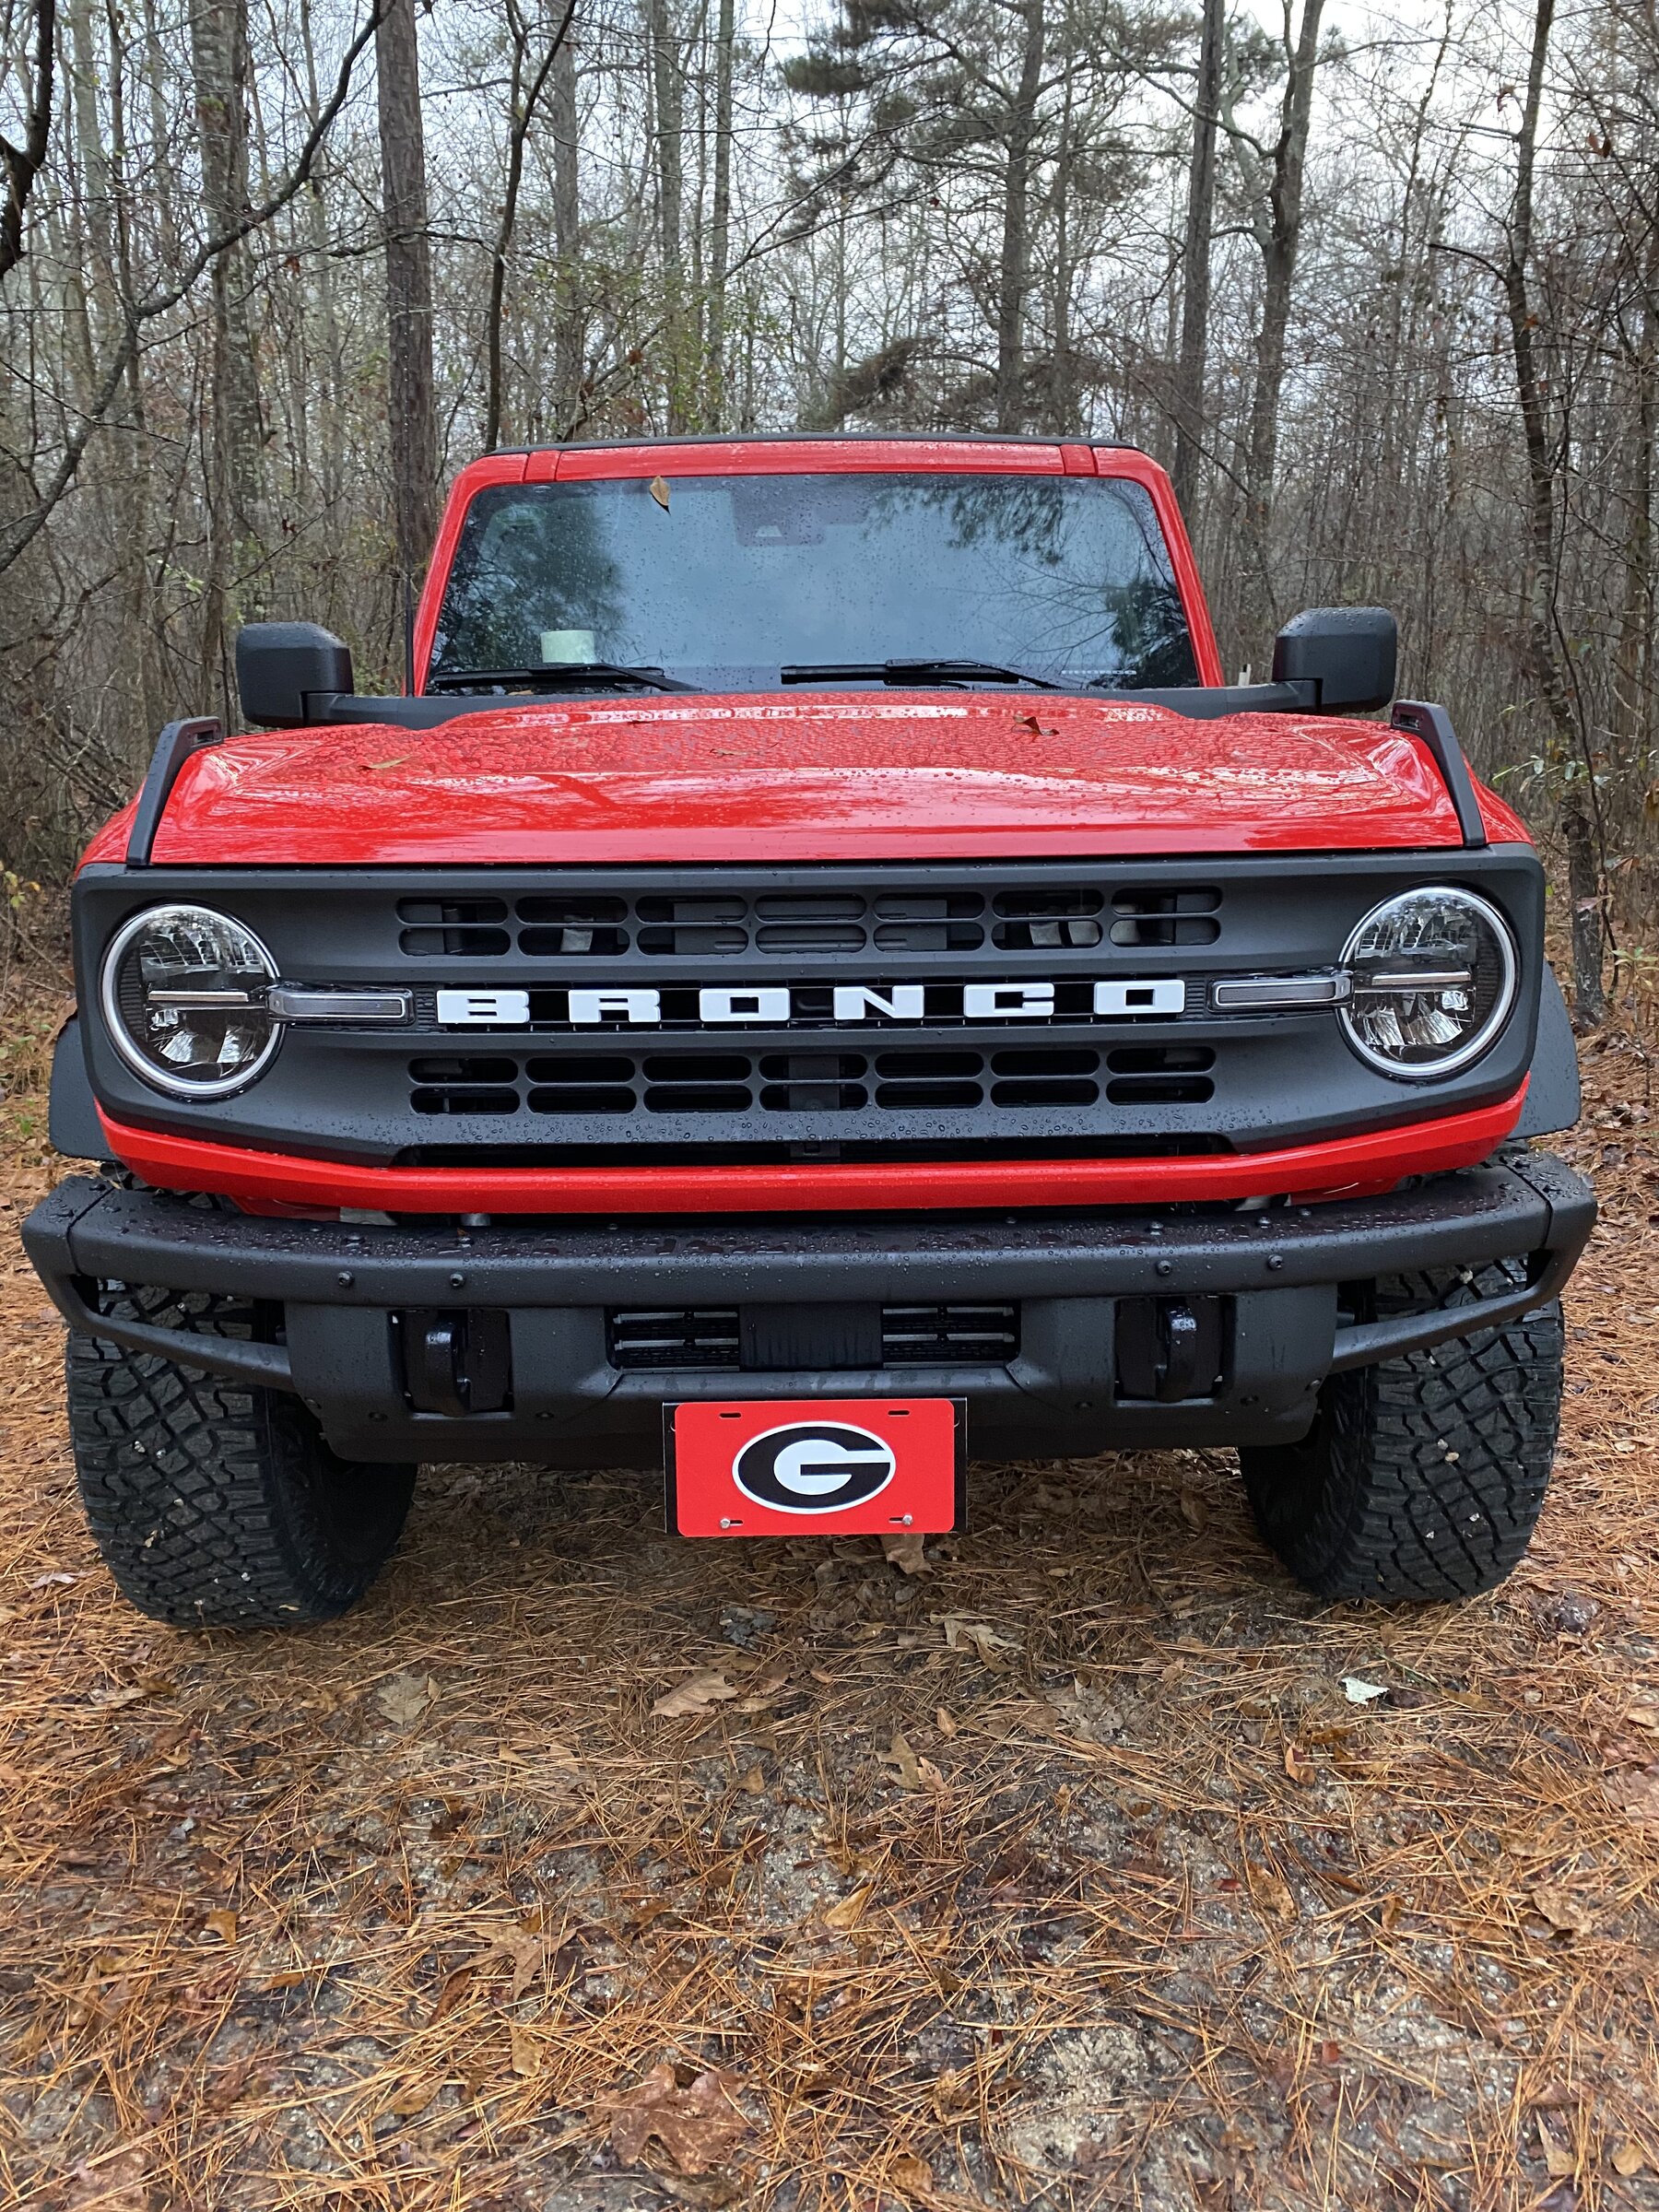 Ford Bronco PRICE DROP - Finally a Front License Plate bracket solution - order yours today 270D4E59-9536-4C66-A7B3-F4A8A3C65247